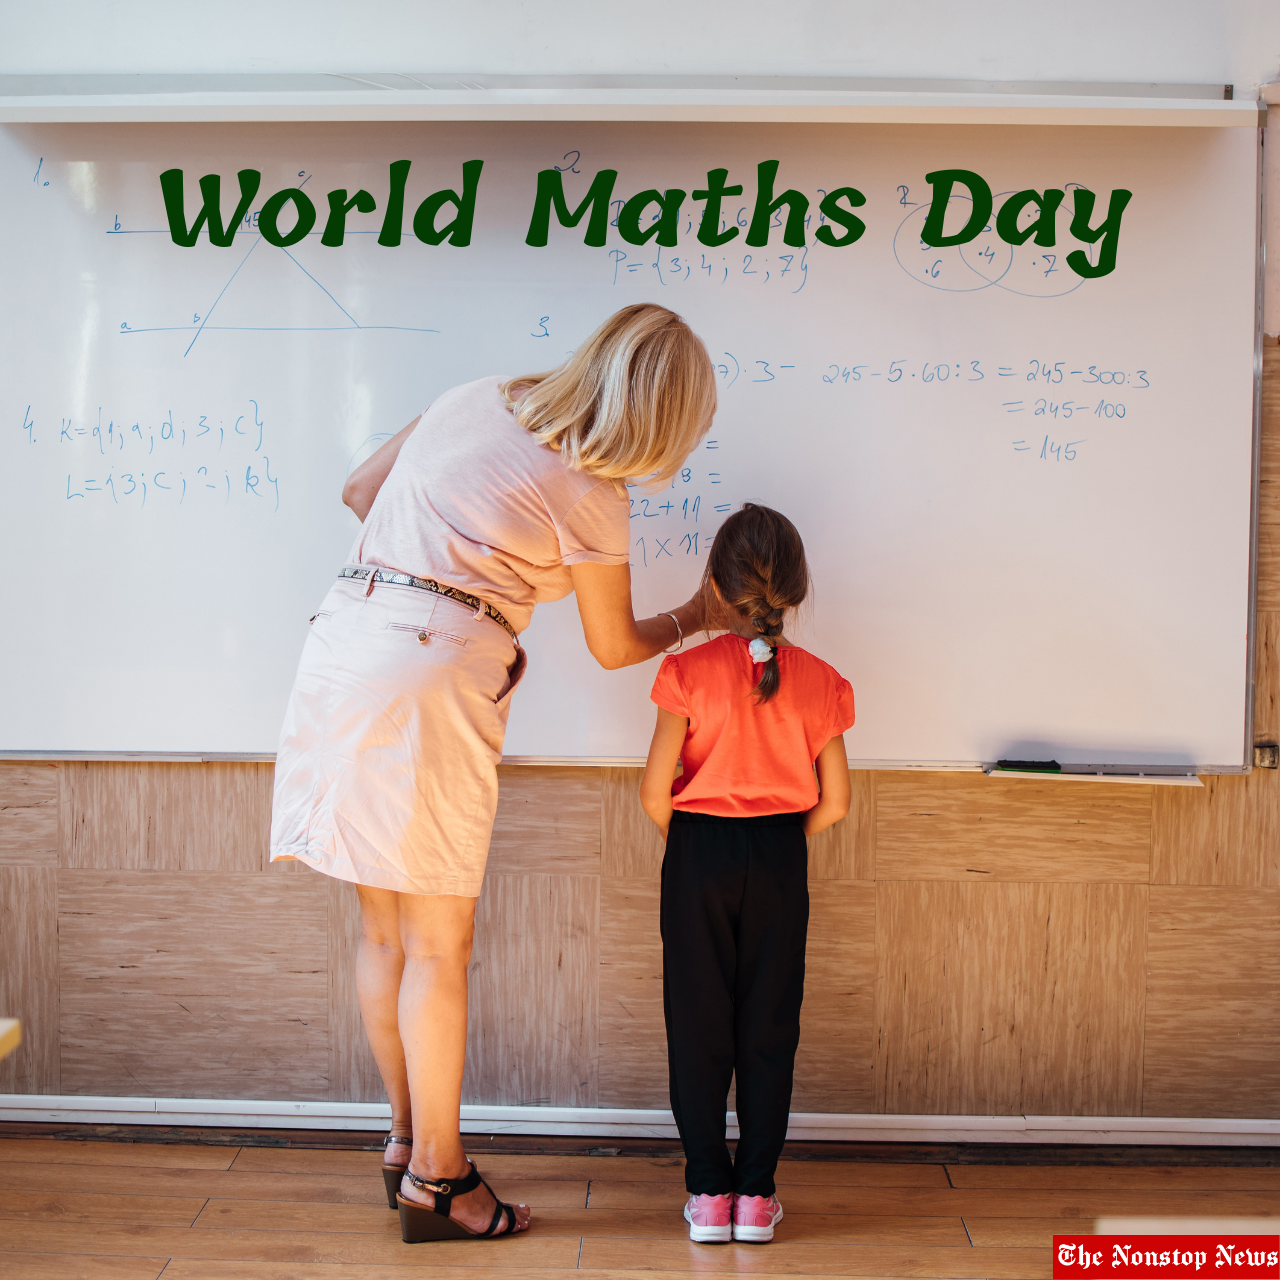 World Maths Day 2022 Theme, Date, History, Significance, Importance, and More